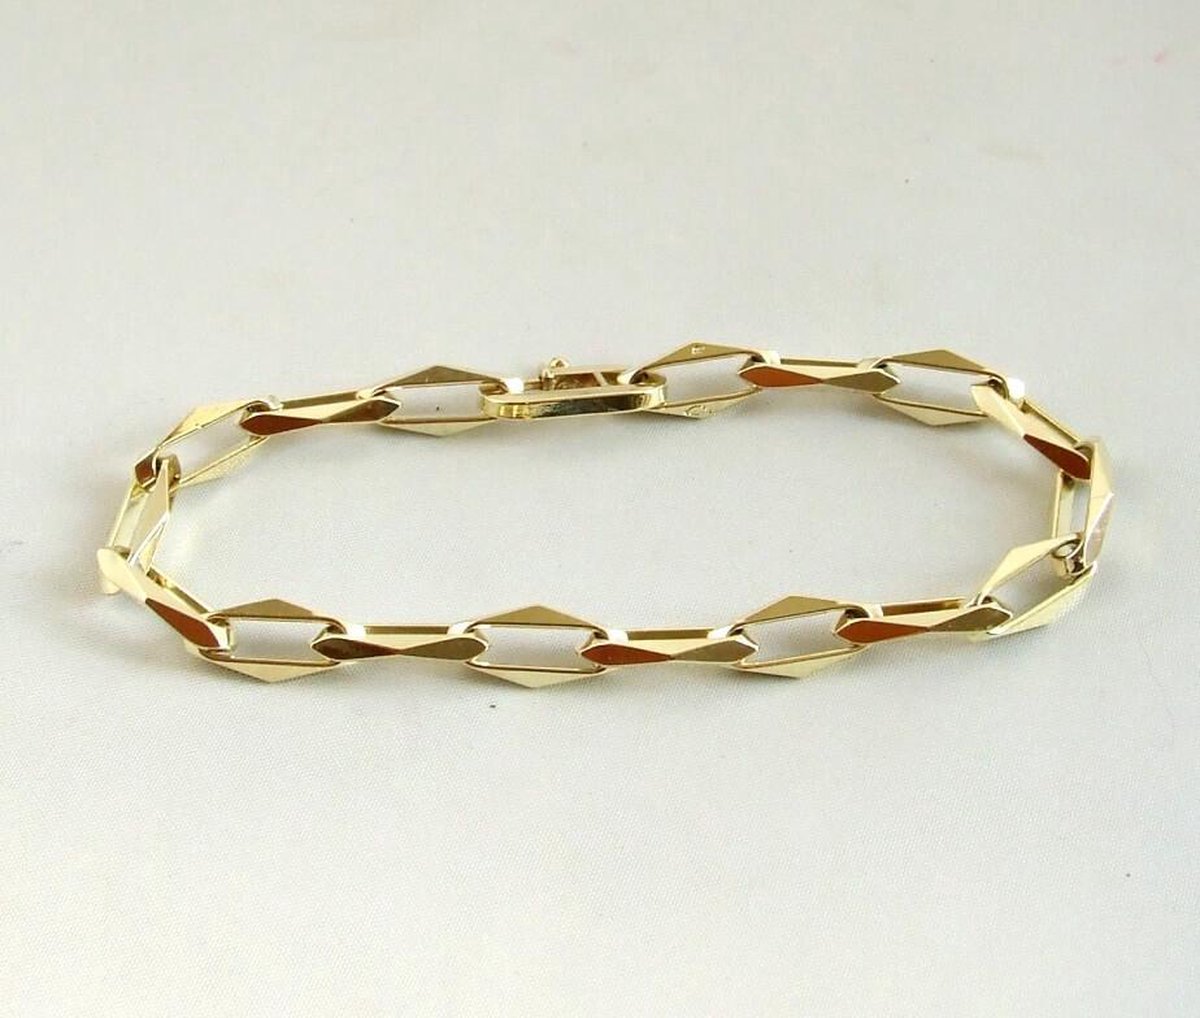 T Familielid Labe Gouden closed forever armband | bol.com